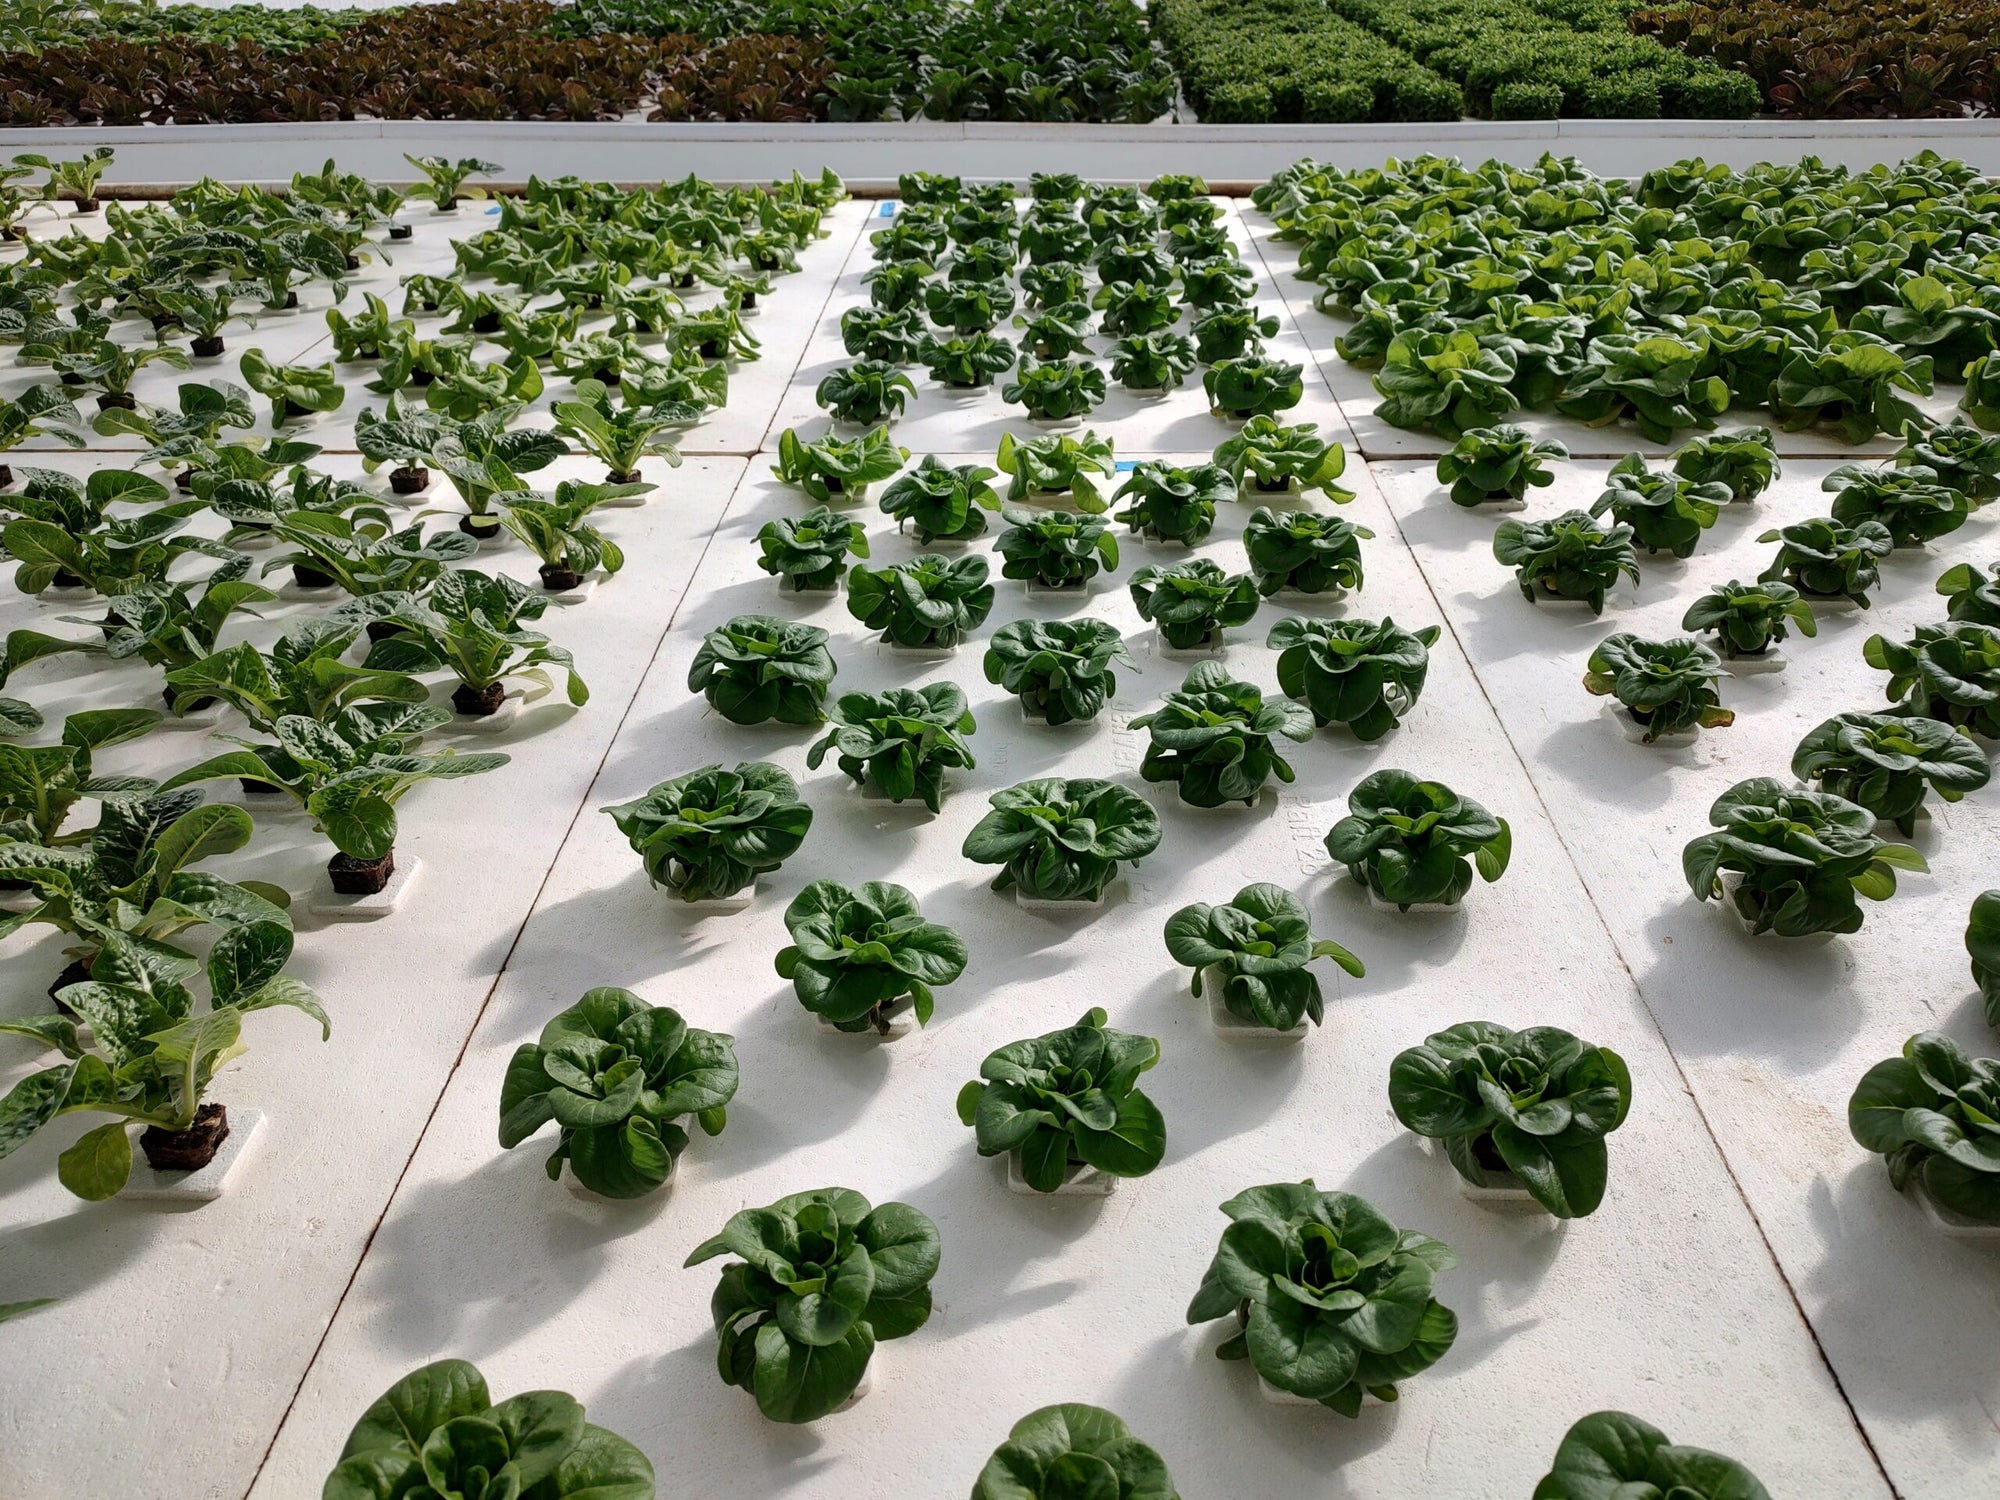 A row of Aquaponics For Life Deep Water Culture Raft Boards lettuce plants in a greenhouse.